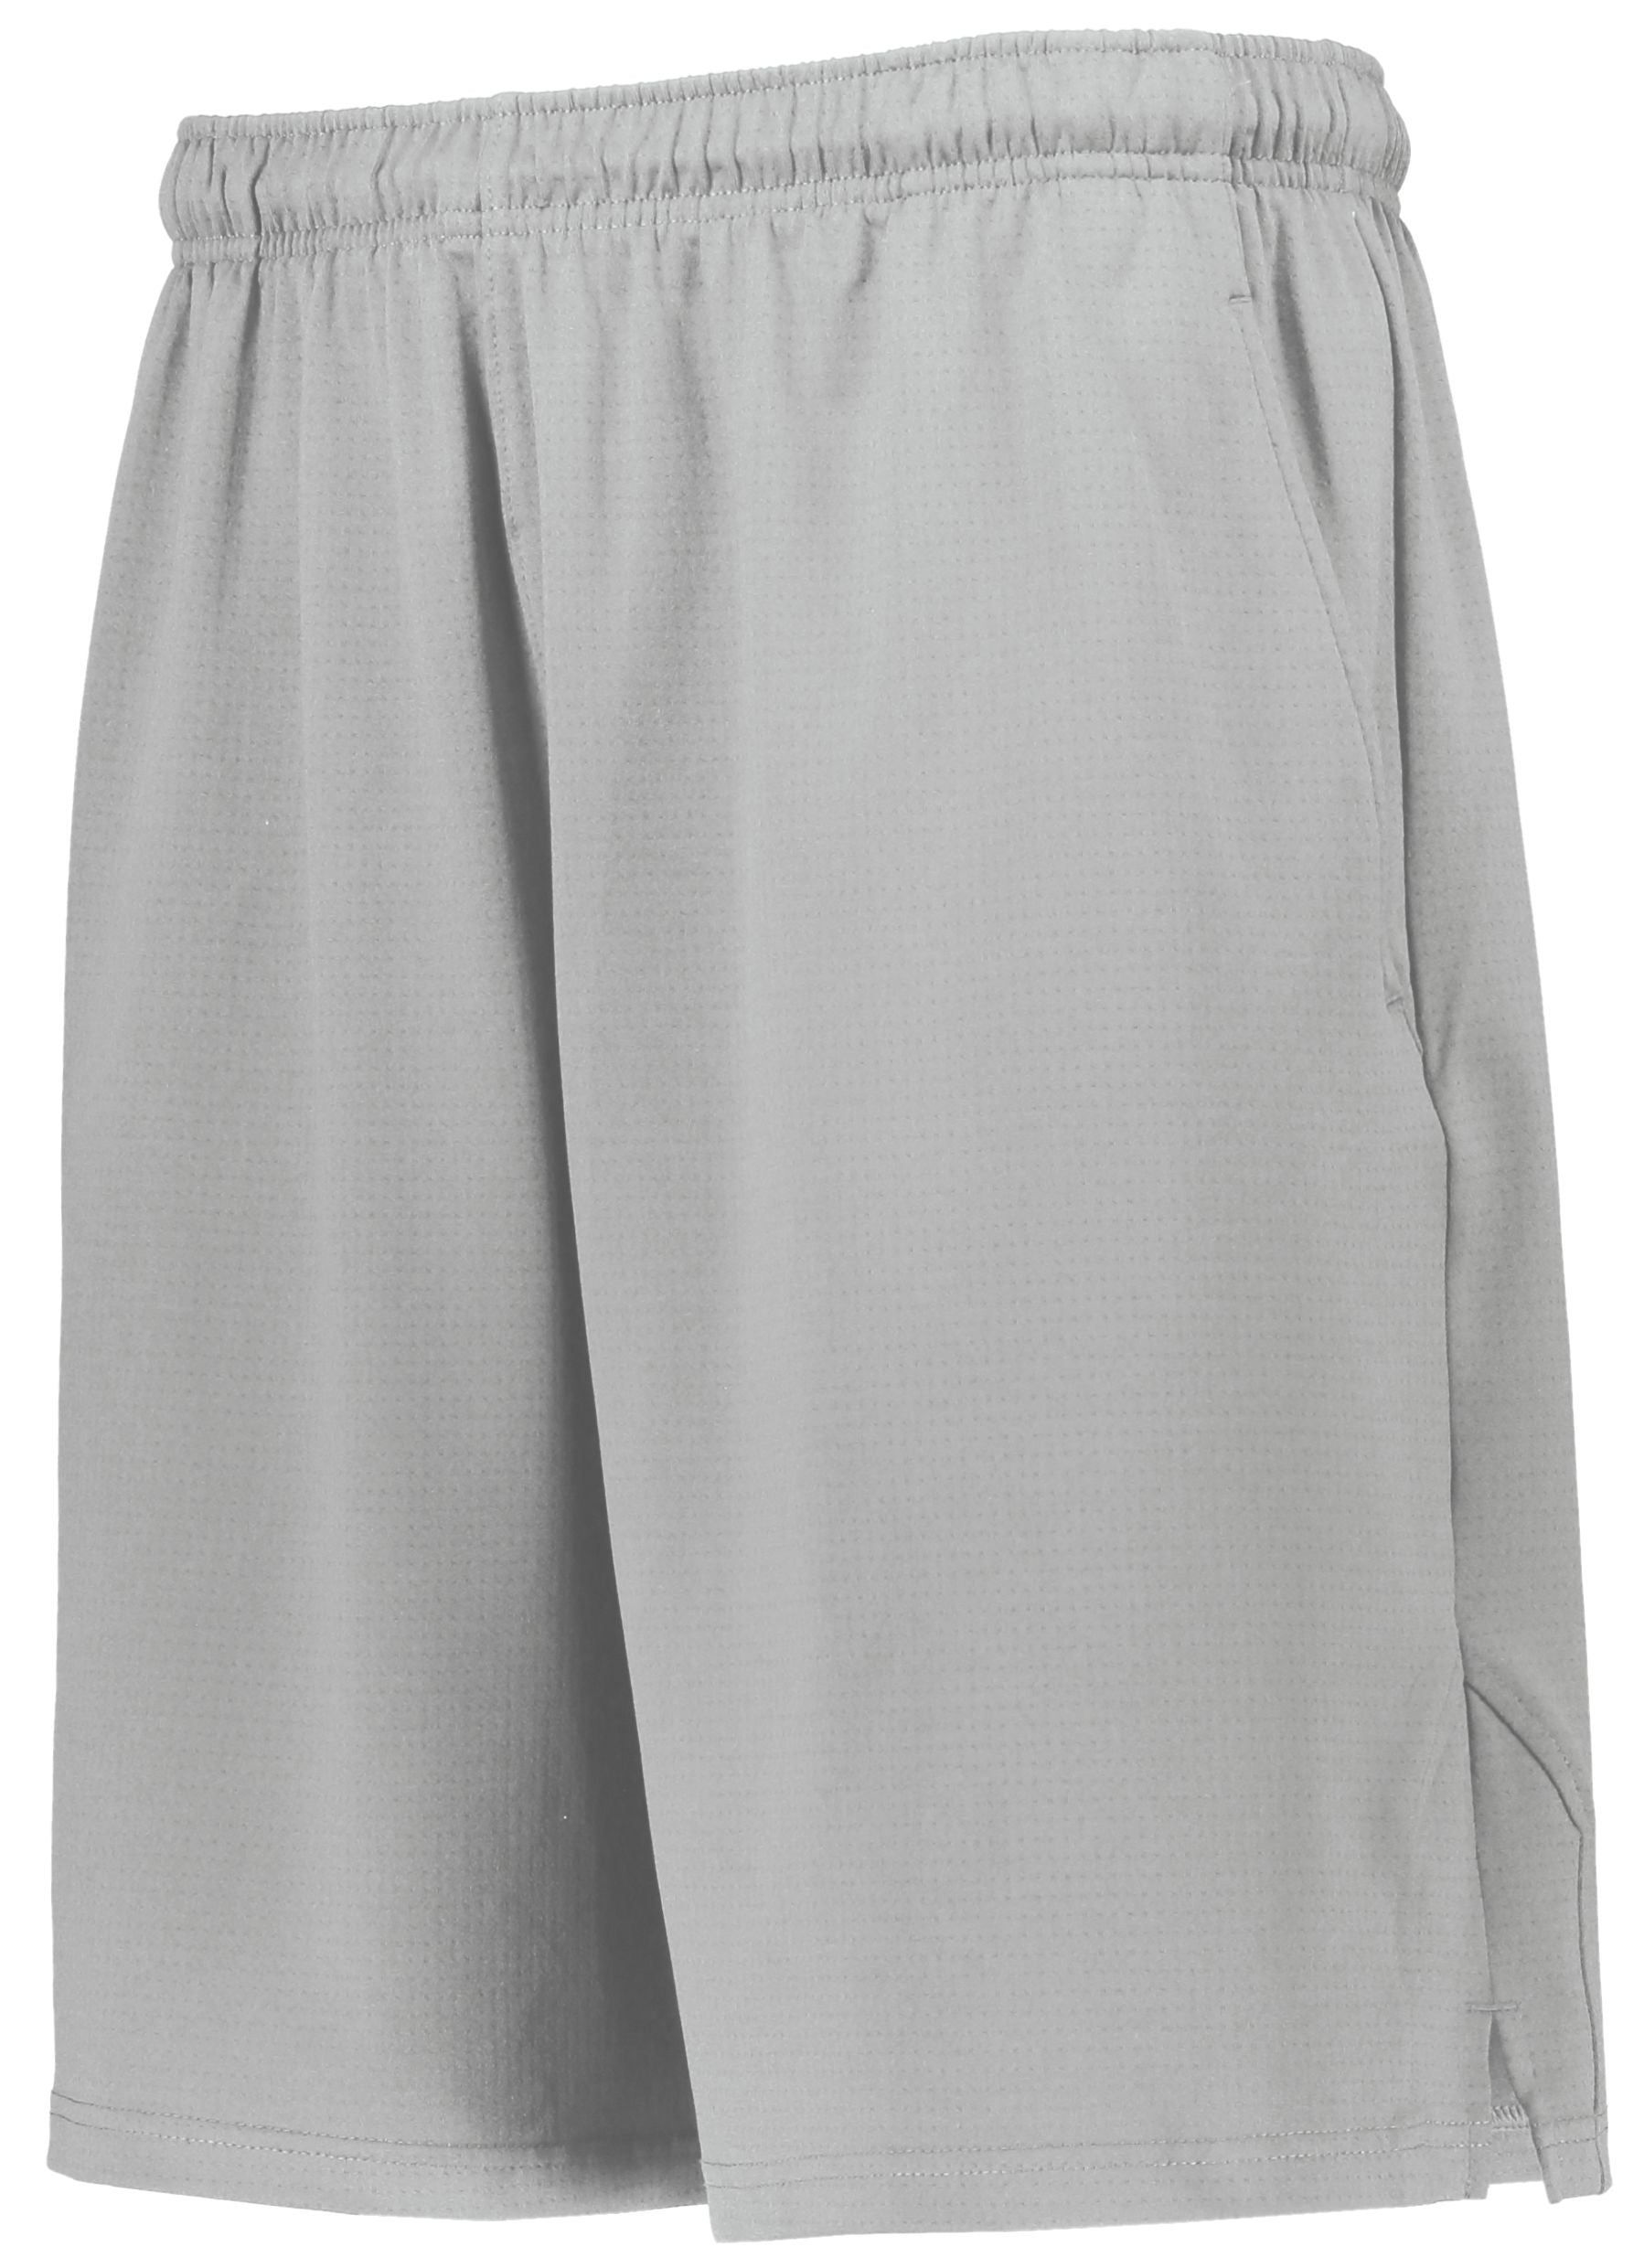 Russell Athletic Team Driven Coaches Shorts in Gridiron Silver  -Part of the Adult, Adult-Shorts, Russell-Athletic-Products product lines at KanaleyCreations.com